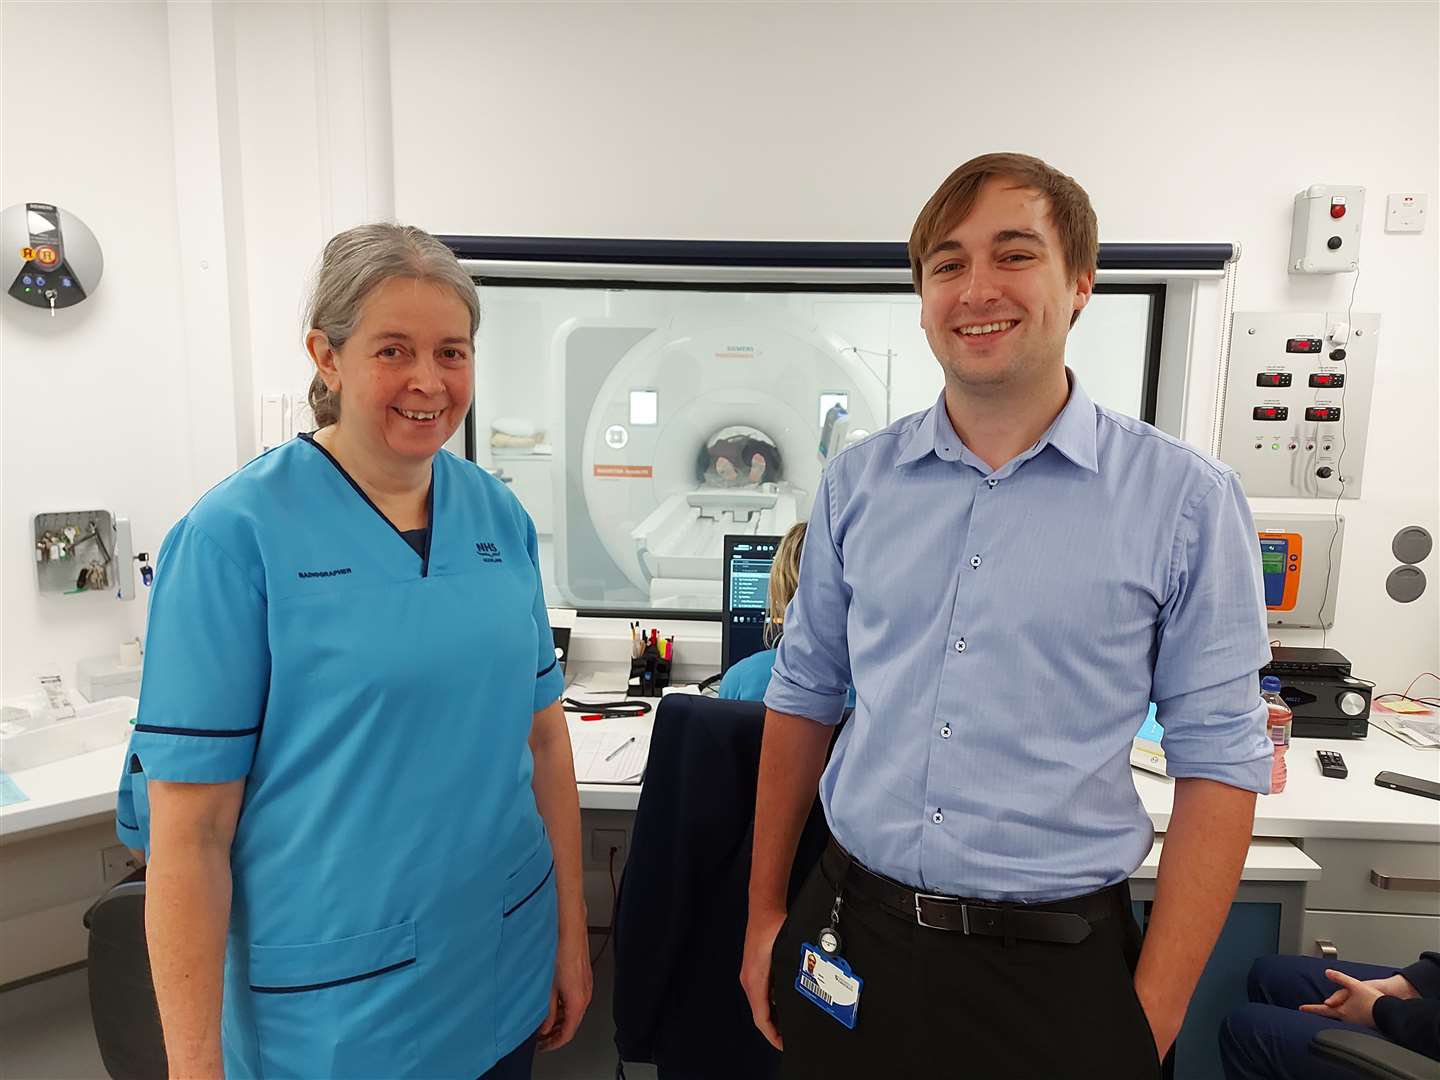 Superintendent MRI radiographer Laura Farquharson and clinical scientist Mark Pether in the control room of the Hutchison MRI Centre. Picture: NHS Grampian